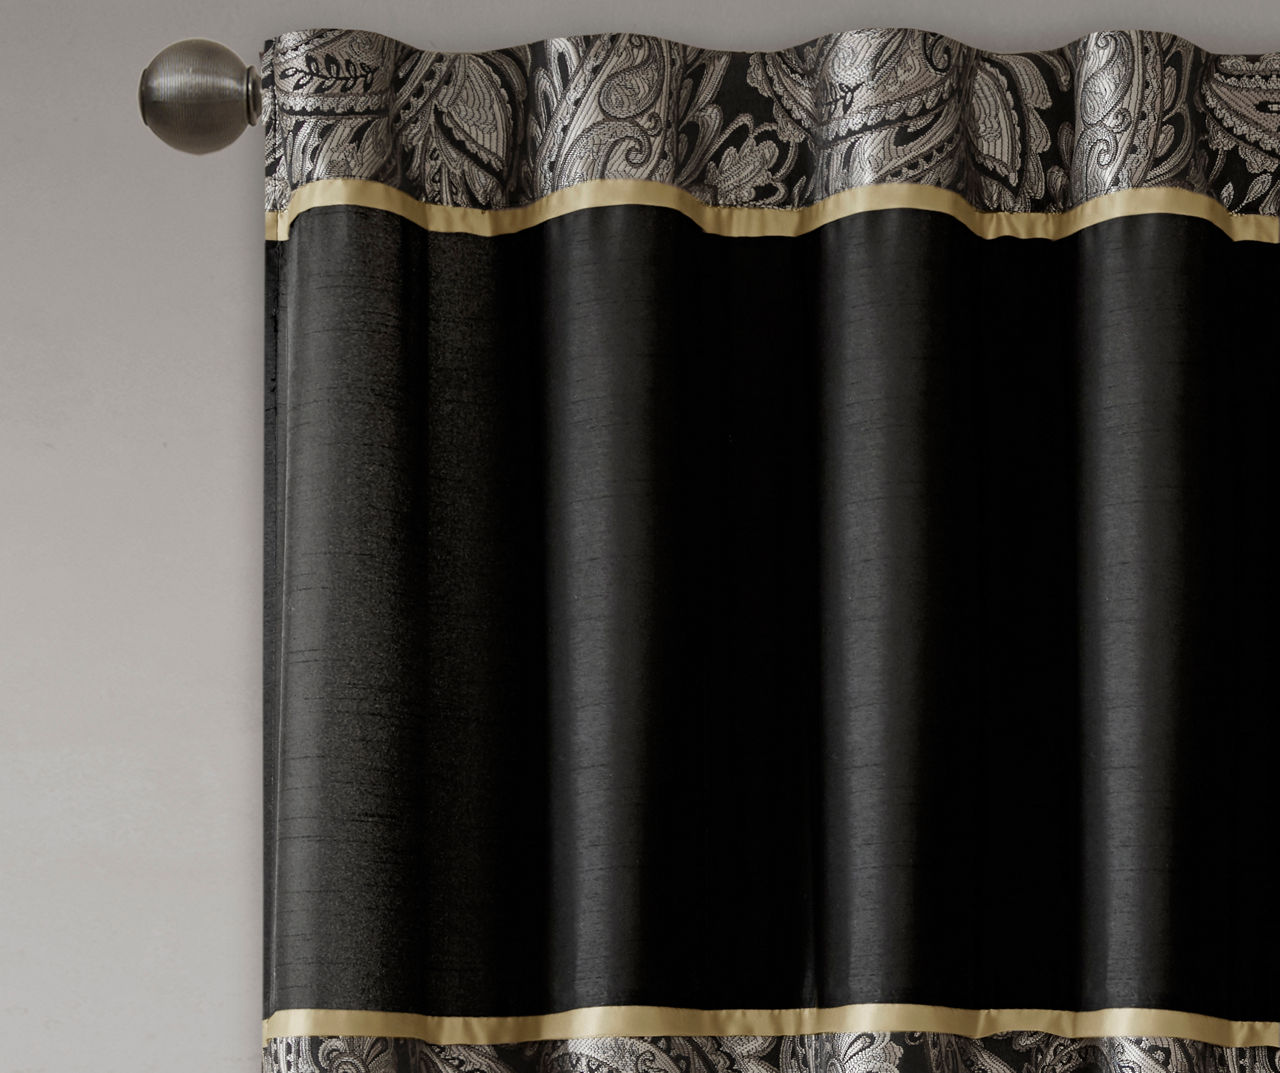 LV CURTAINS – PARIHIL COLLECTIONS